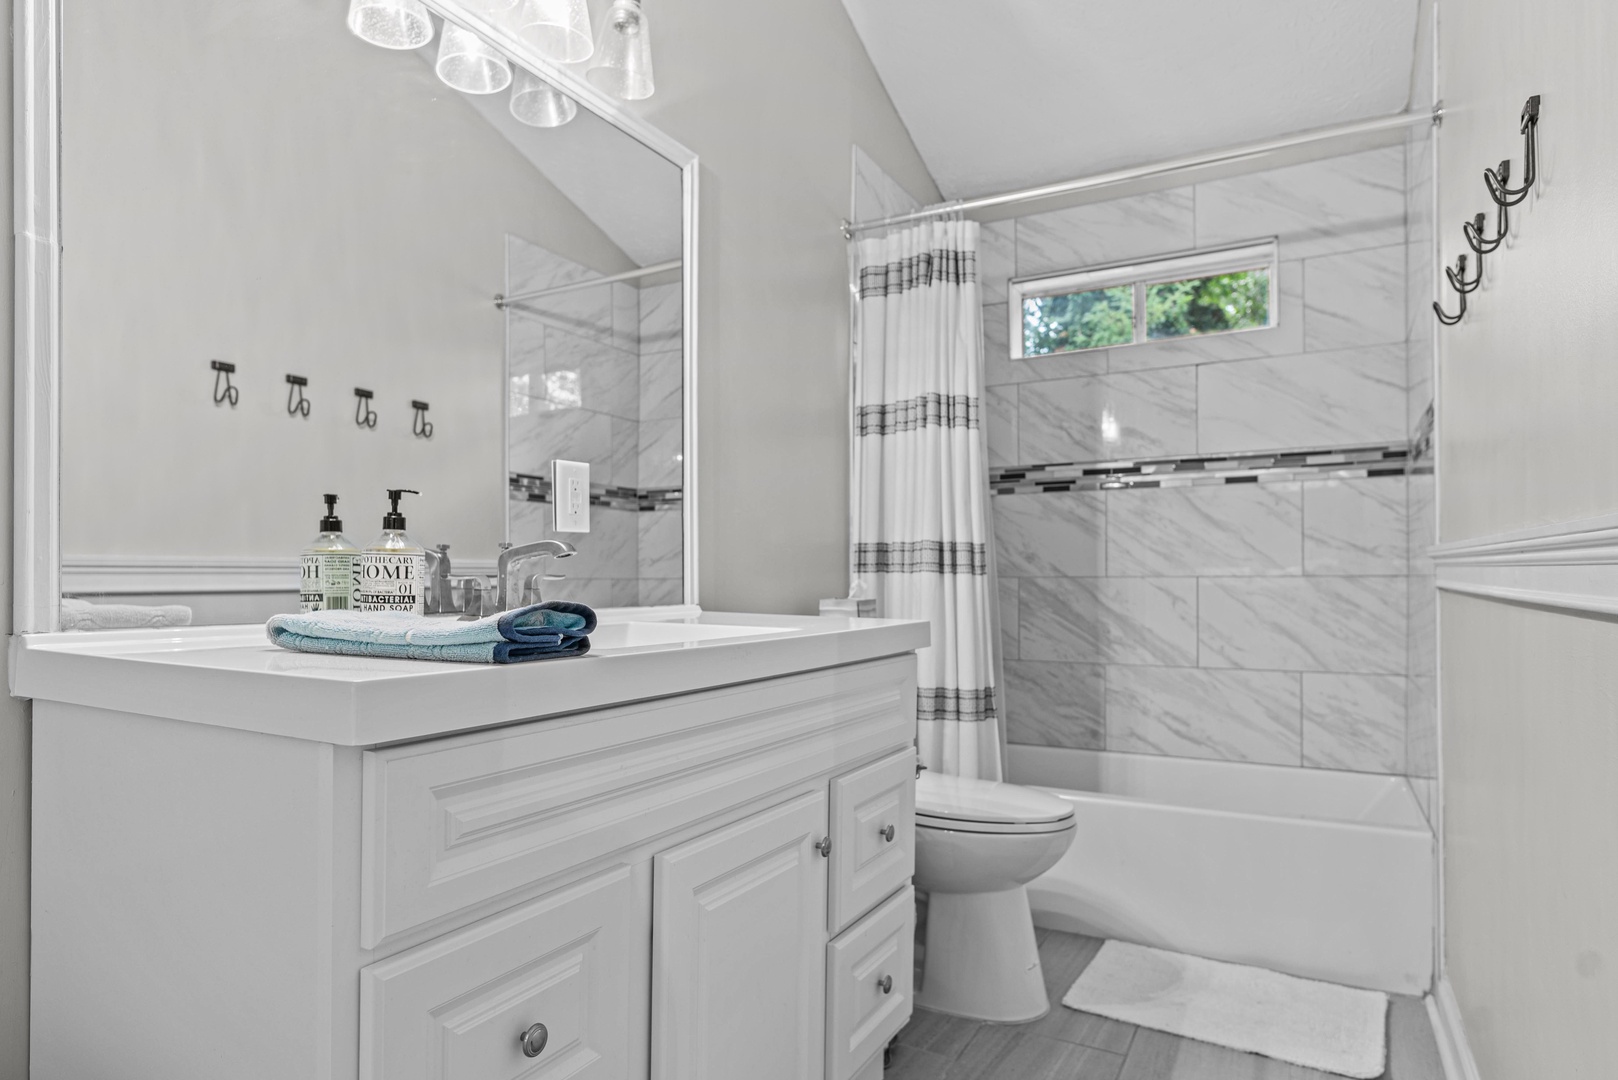 The full bathroom includes a single vanity & shower/tub combo